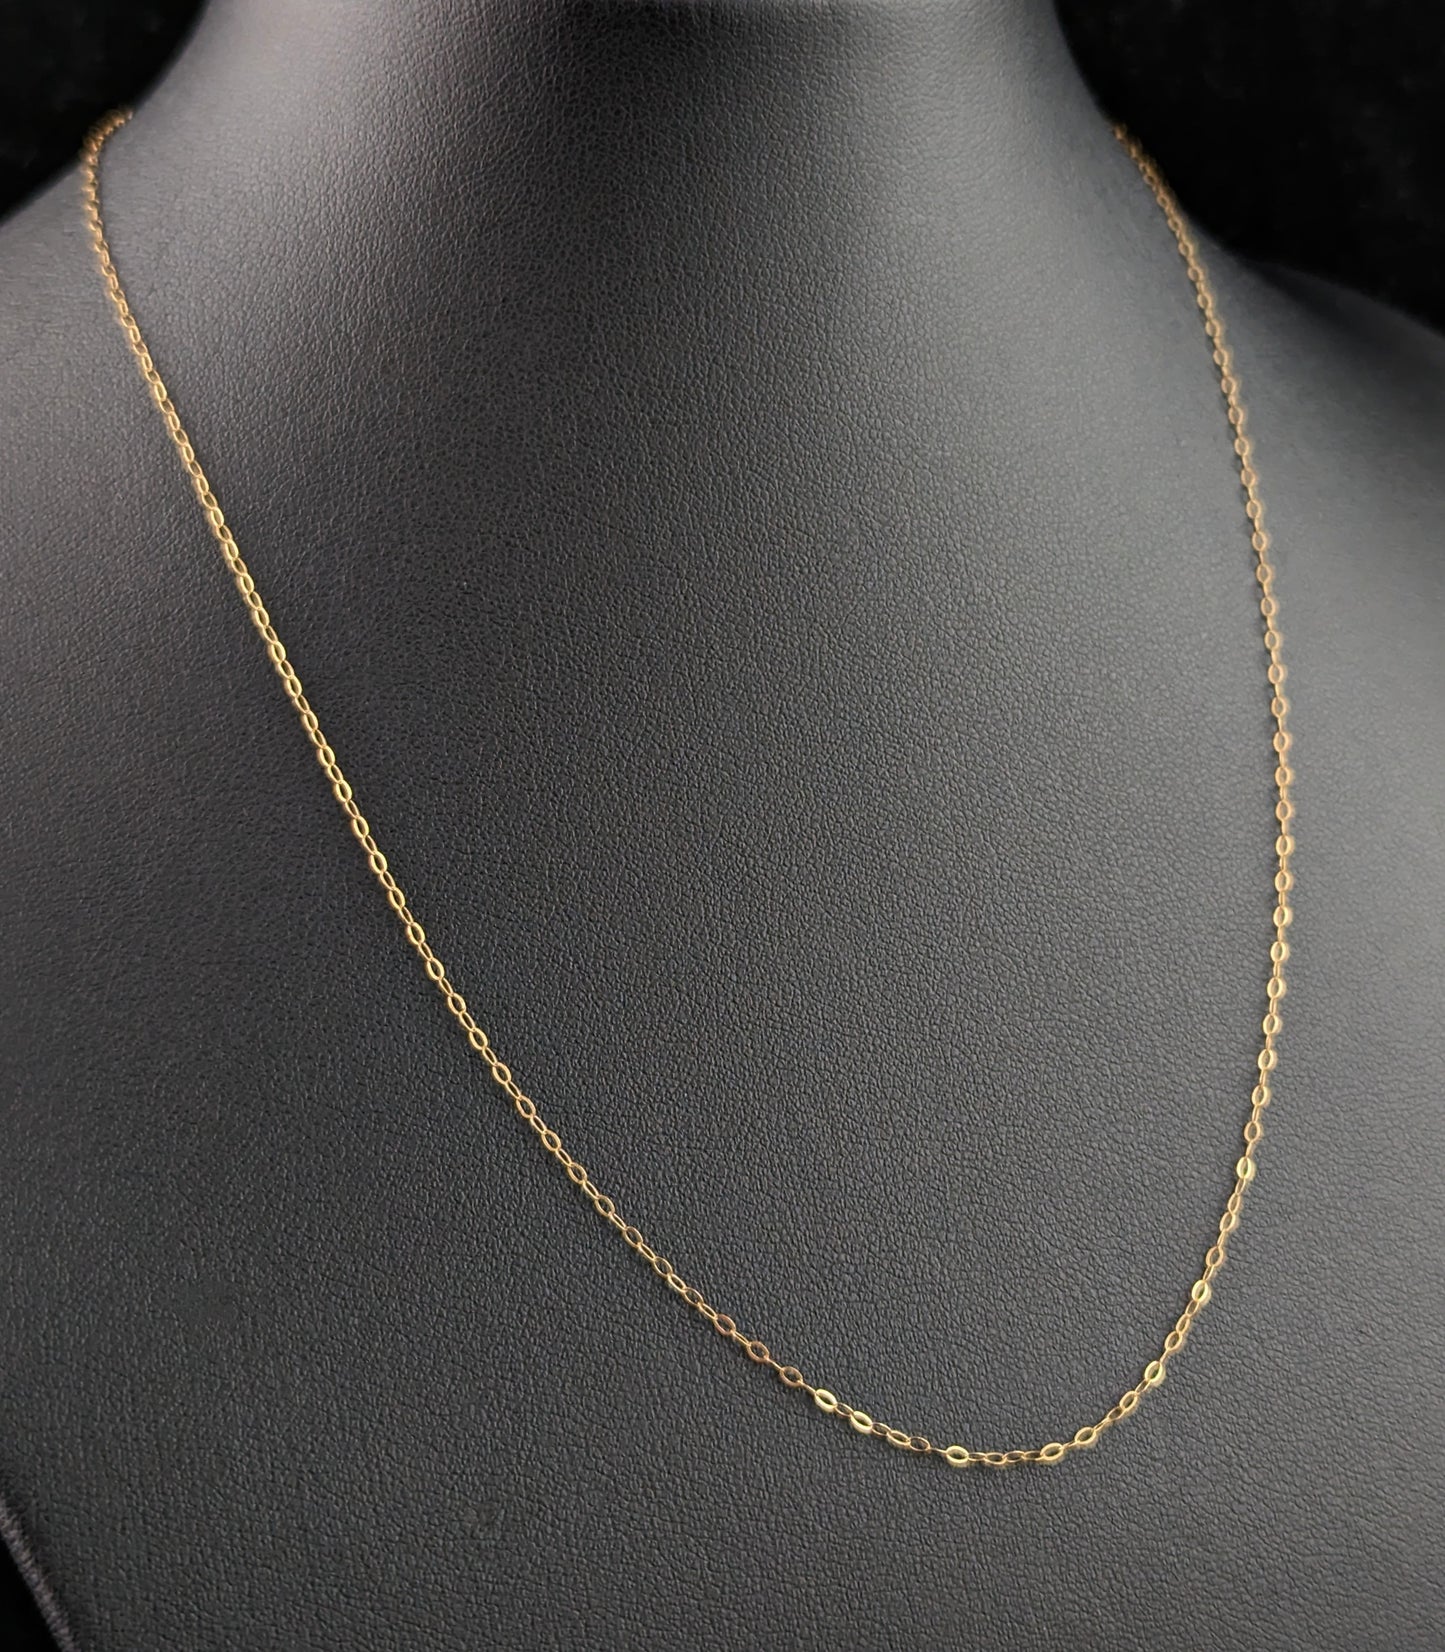 Vintage 9ct yellow gold trace chain necklace, dainty, fine